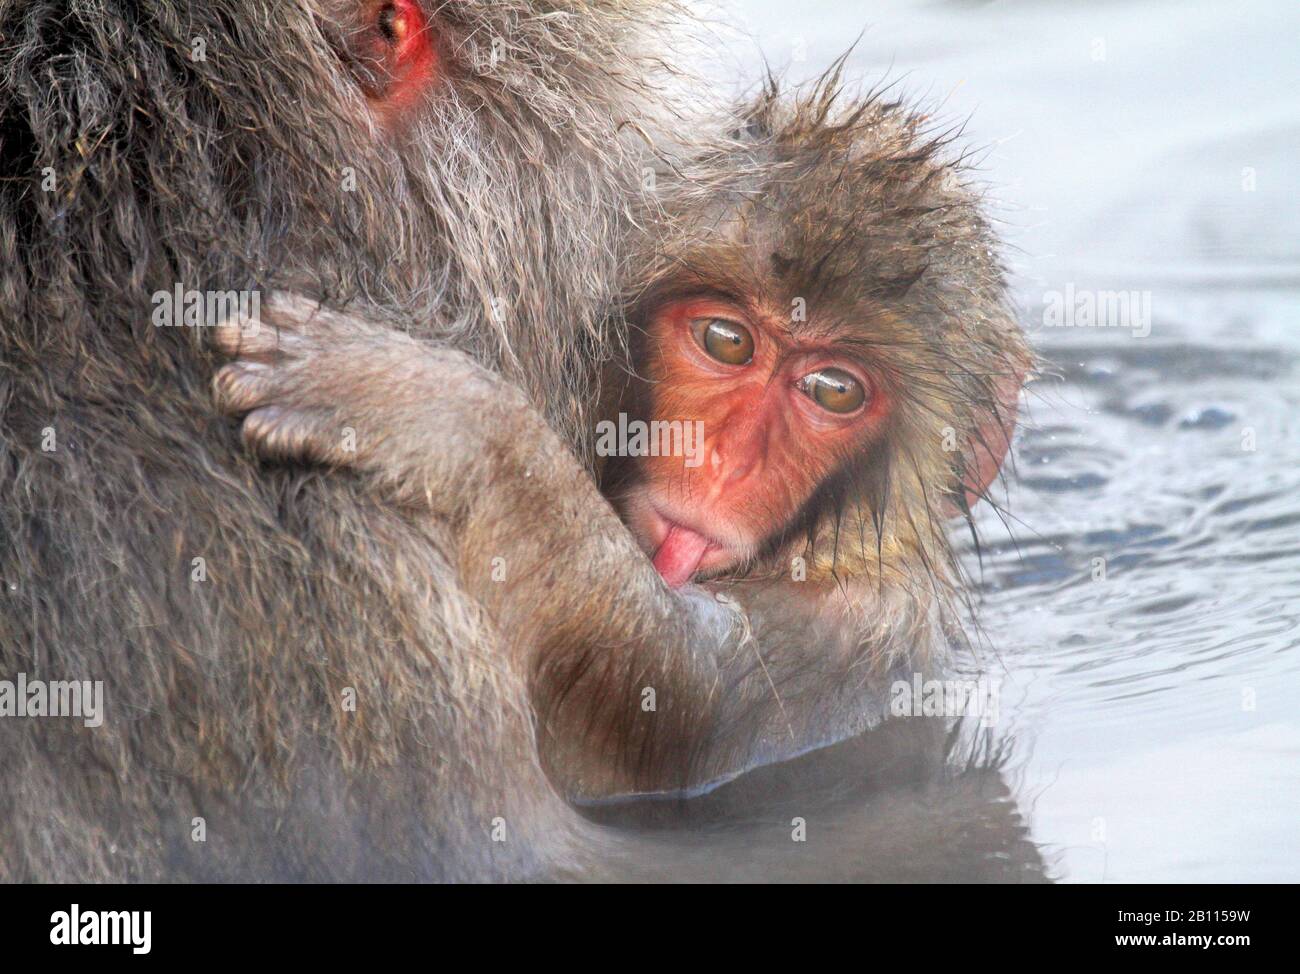 Japanese macaque, snow monkey (Macaca fuscata), pup sticking tongue out, Japan Stock Photo